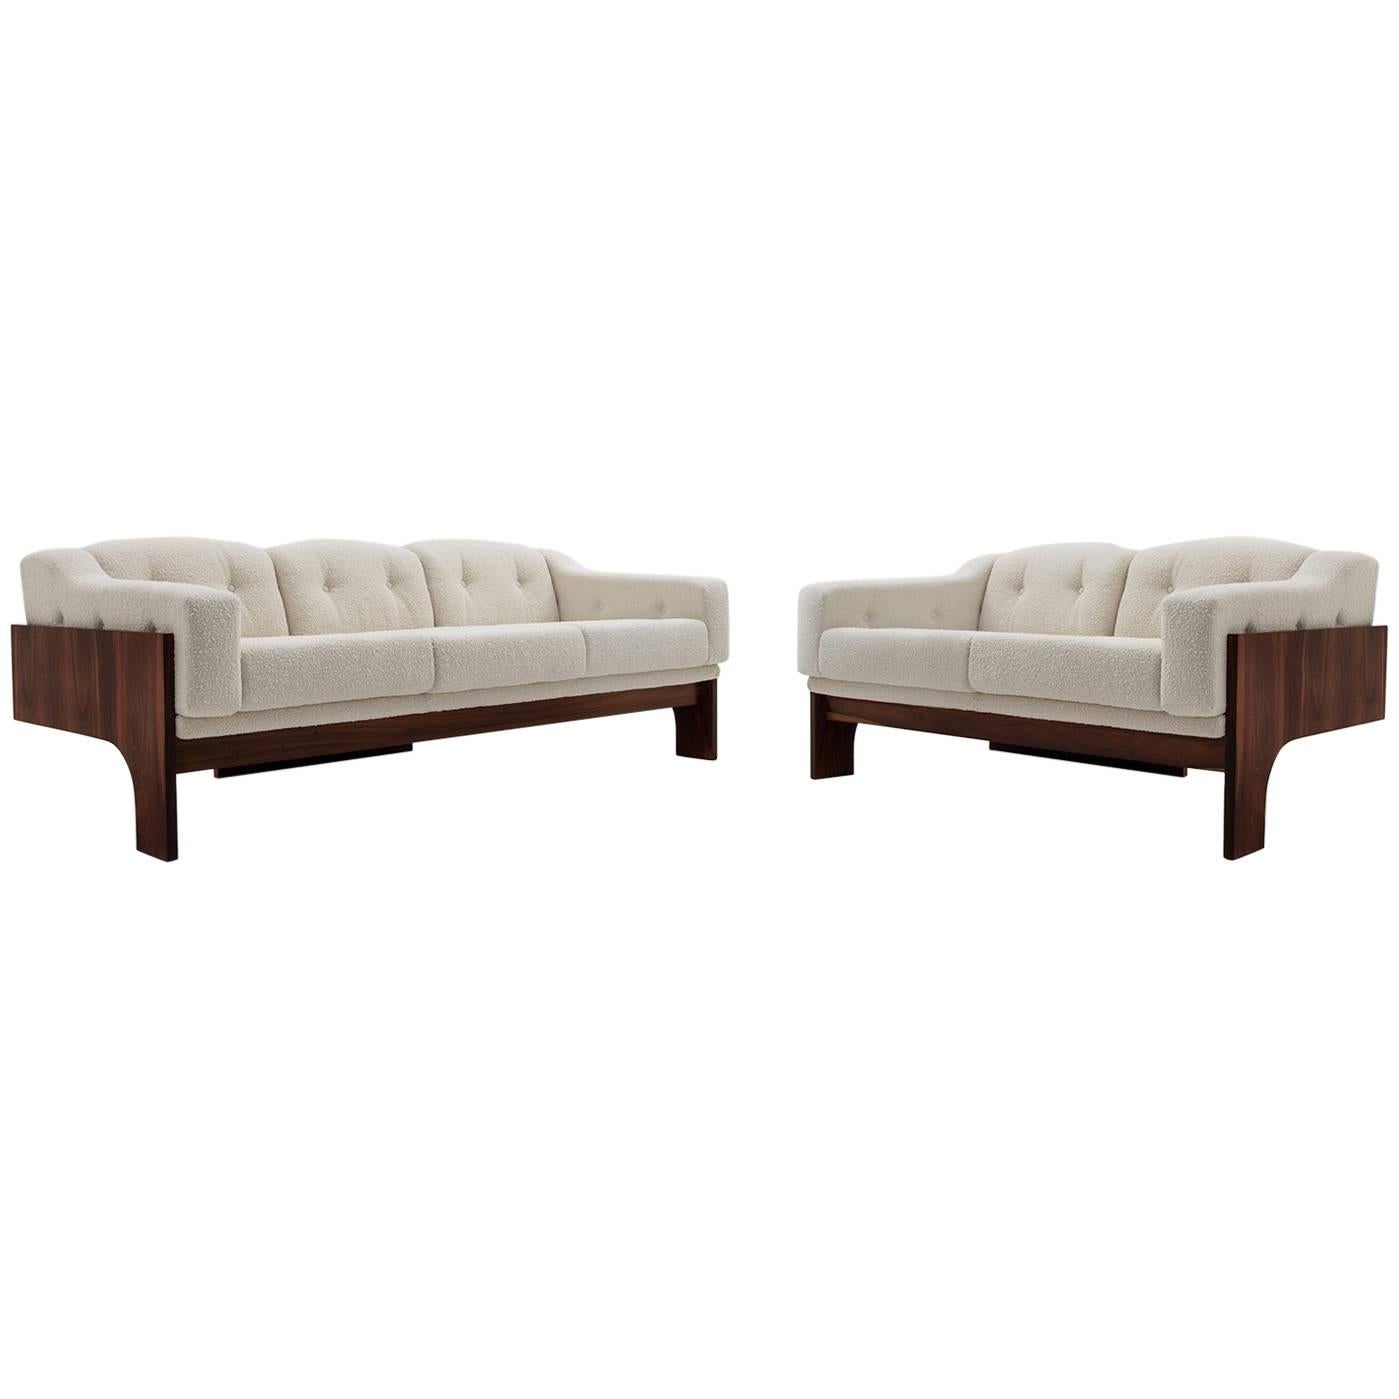 Rosewood and Bouclé Midcentury Sofa Set by Claudio Salocchi for Sormani, 1960s